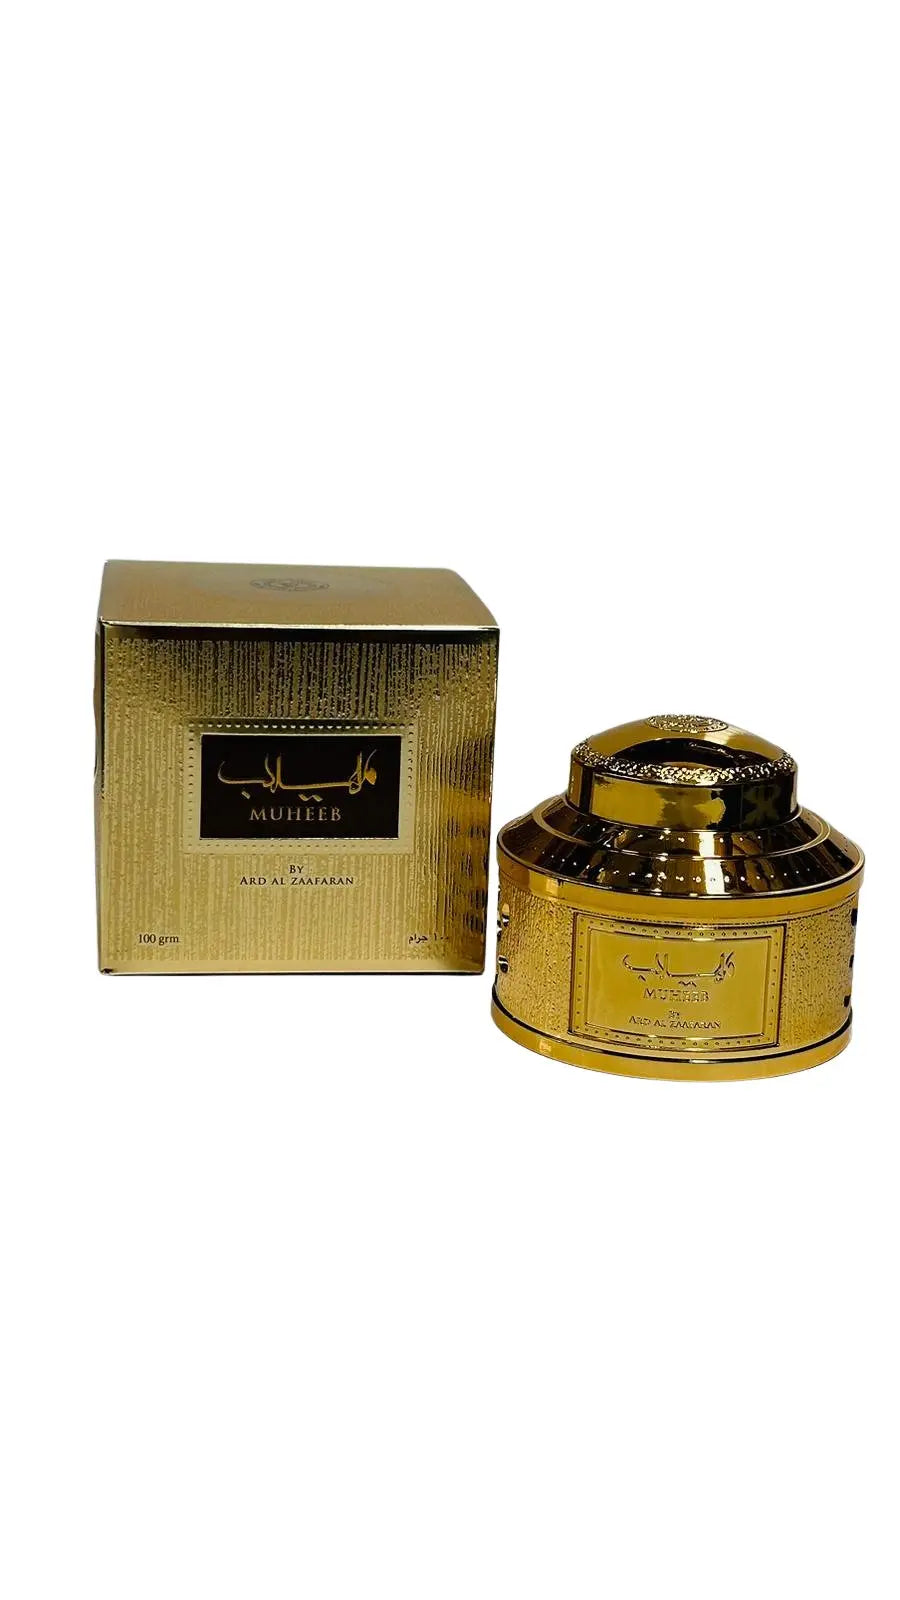 The image shows the Muheeb Bukhoor by Ard Al Zaafaran, which includes a golden textured box and a container. On the left, the square box has a richly textured gold finish with a black label that has the product name "MUHEEB" in white Arabic script and English below it. It states the quantity as "100 grm" and is branded with "BY ARD AL ZAAFARAN." To the right, there is a round golden container with a similar textured pattern and a glossy finish.